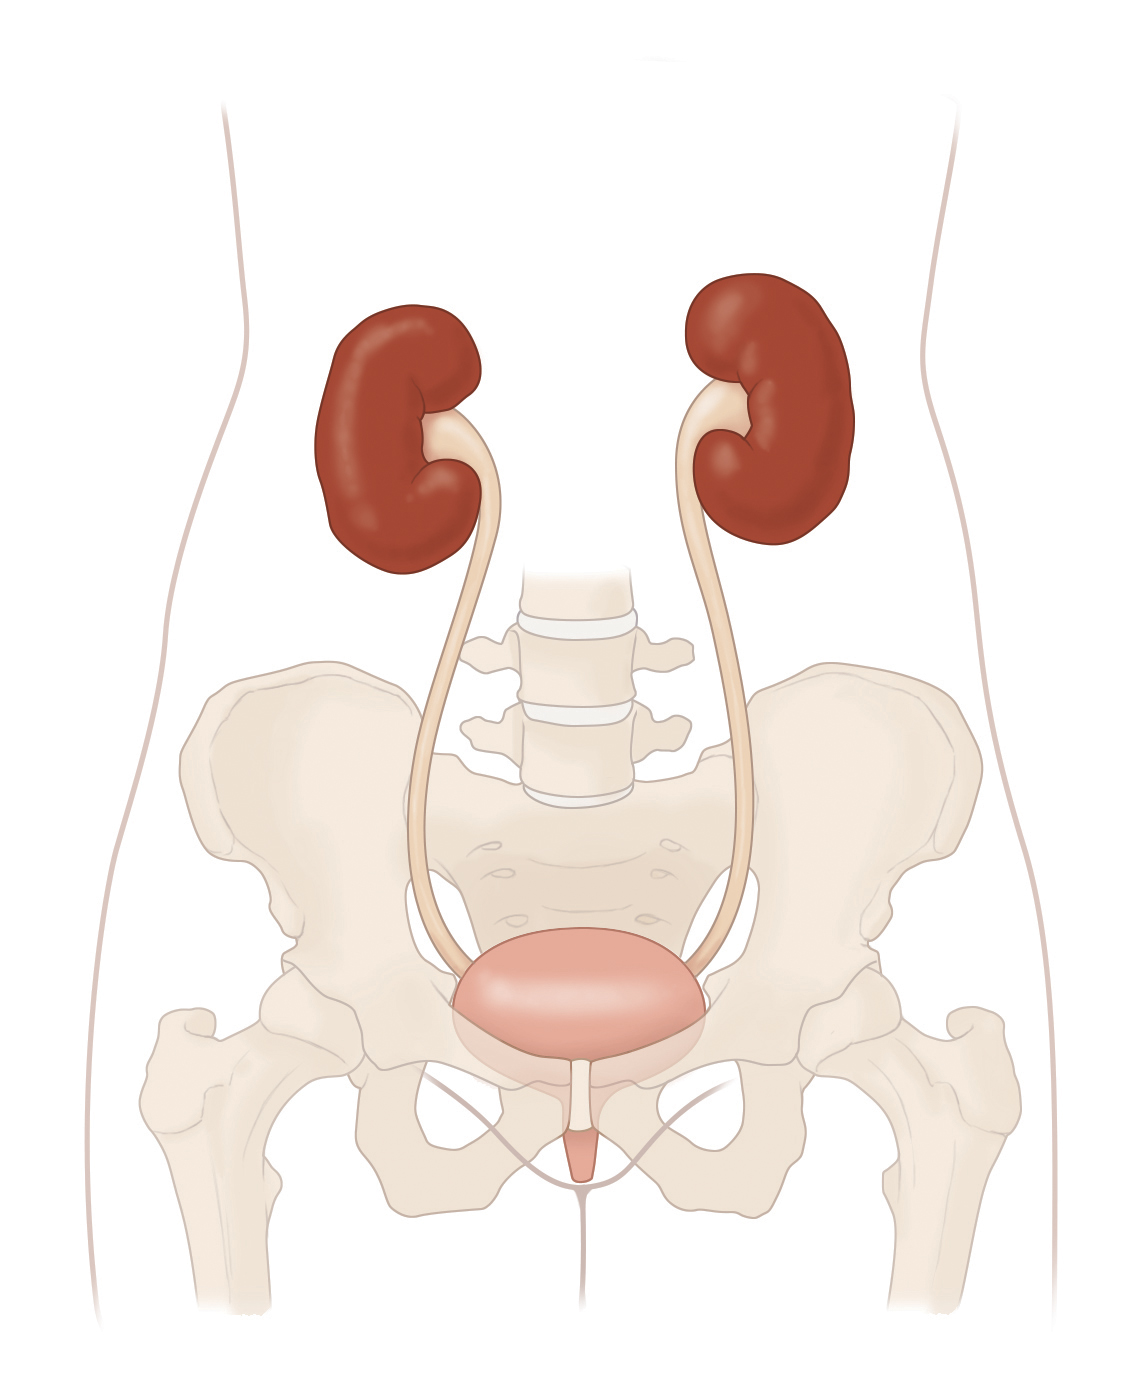 The Urinary Tract & How It Works - NIDDK